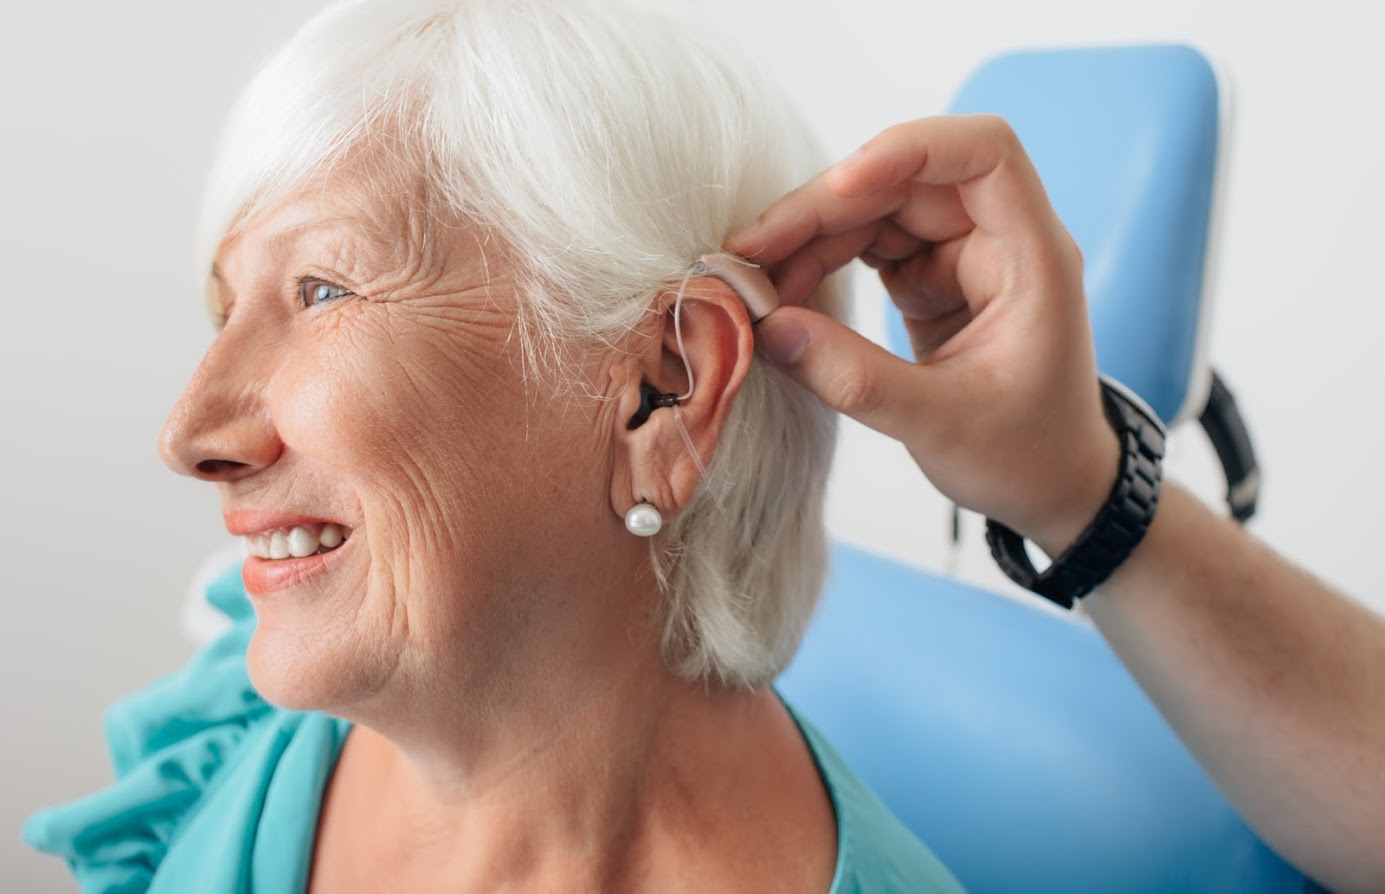 A hearing aid being placed on an elderly woman